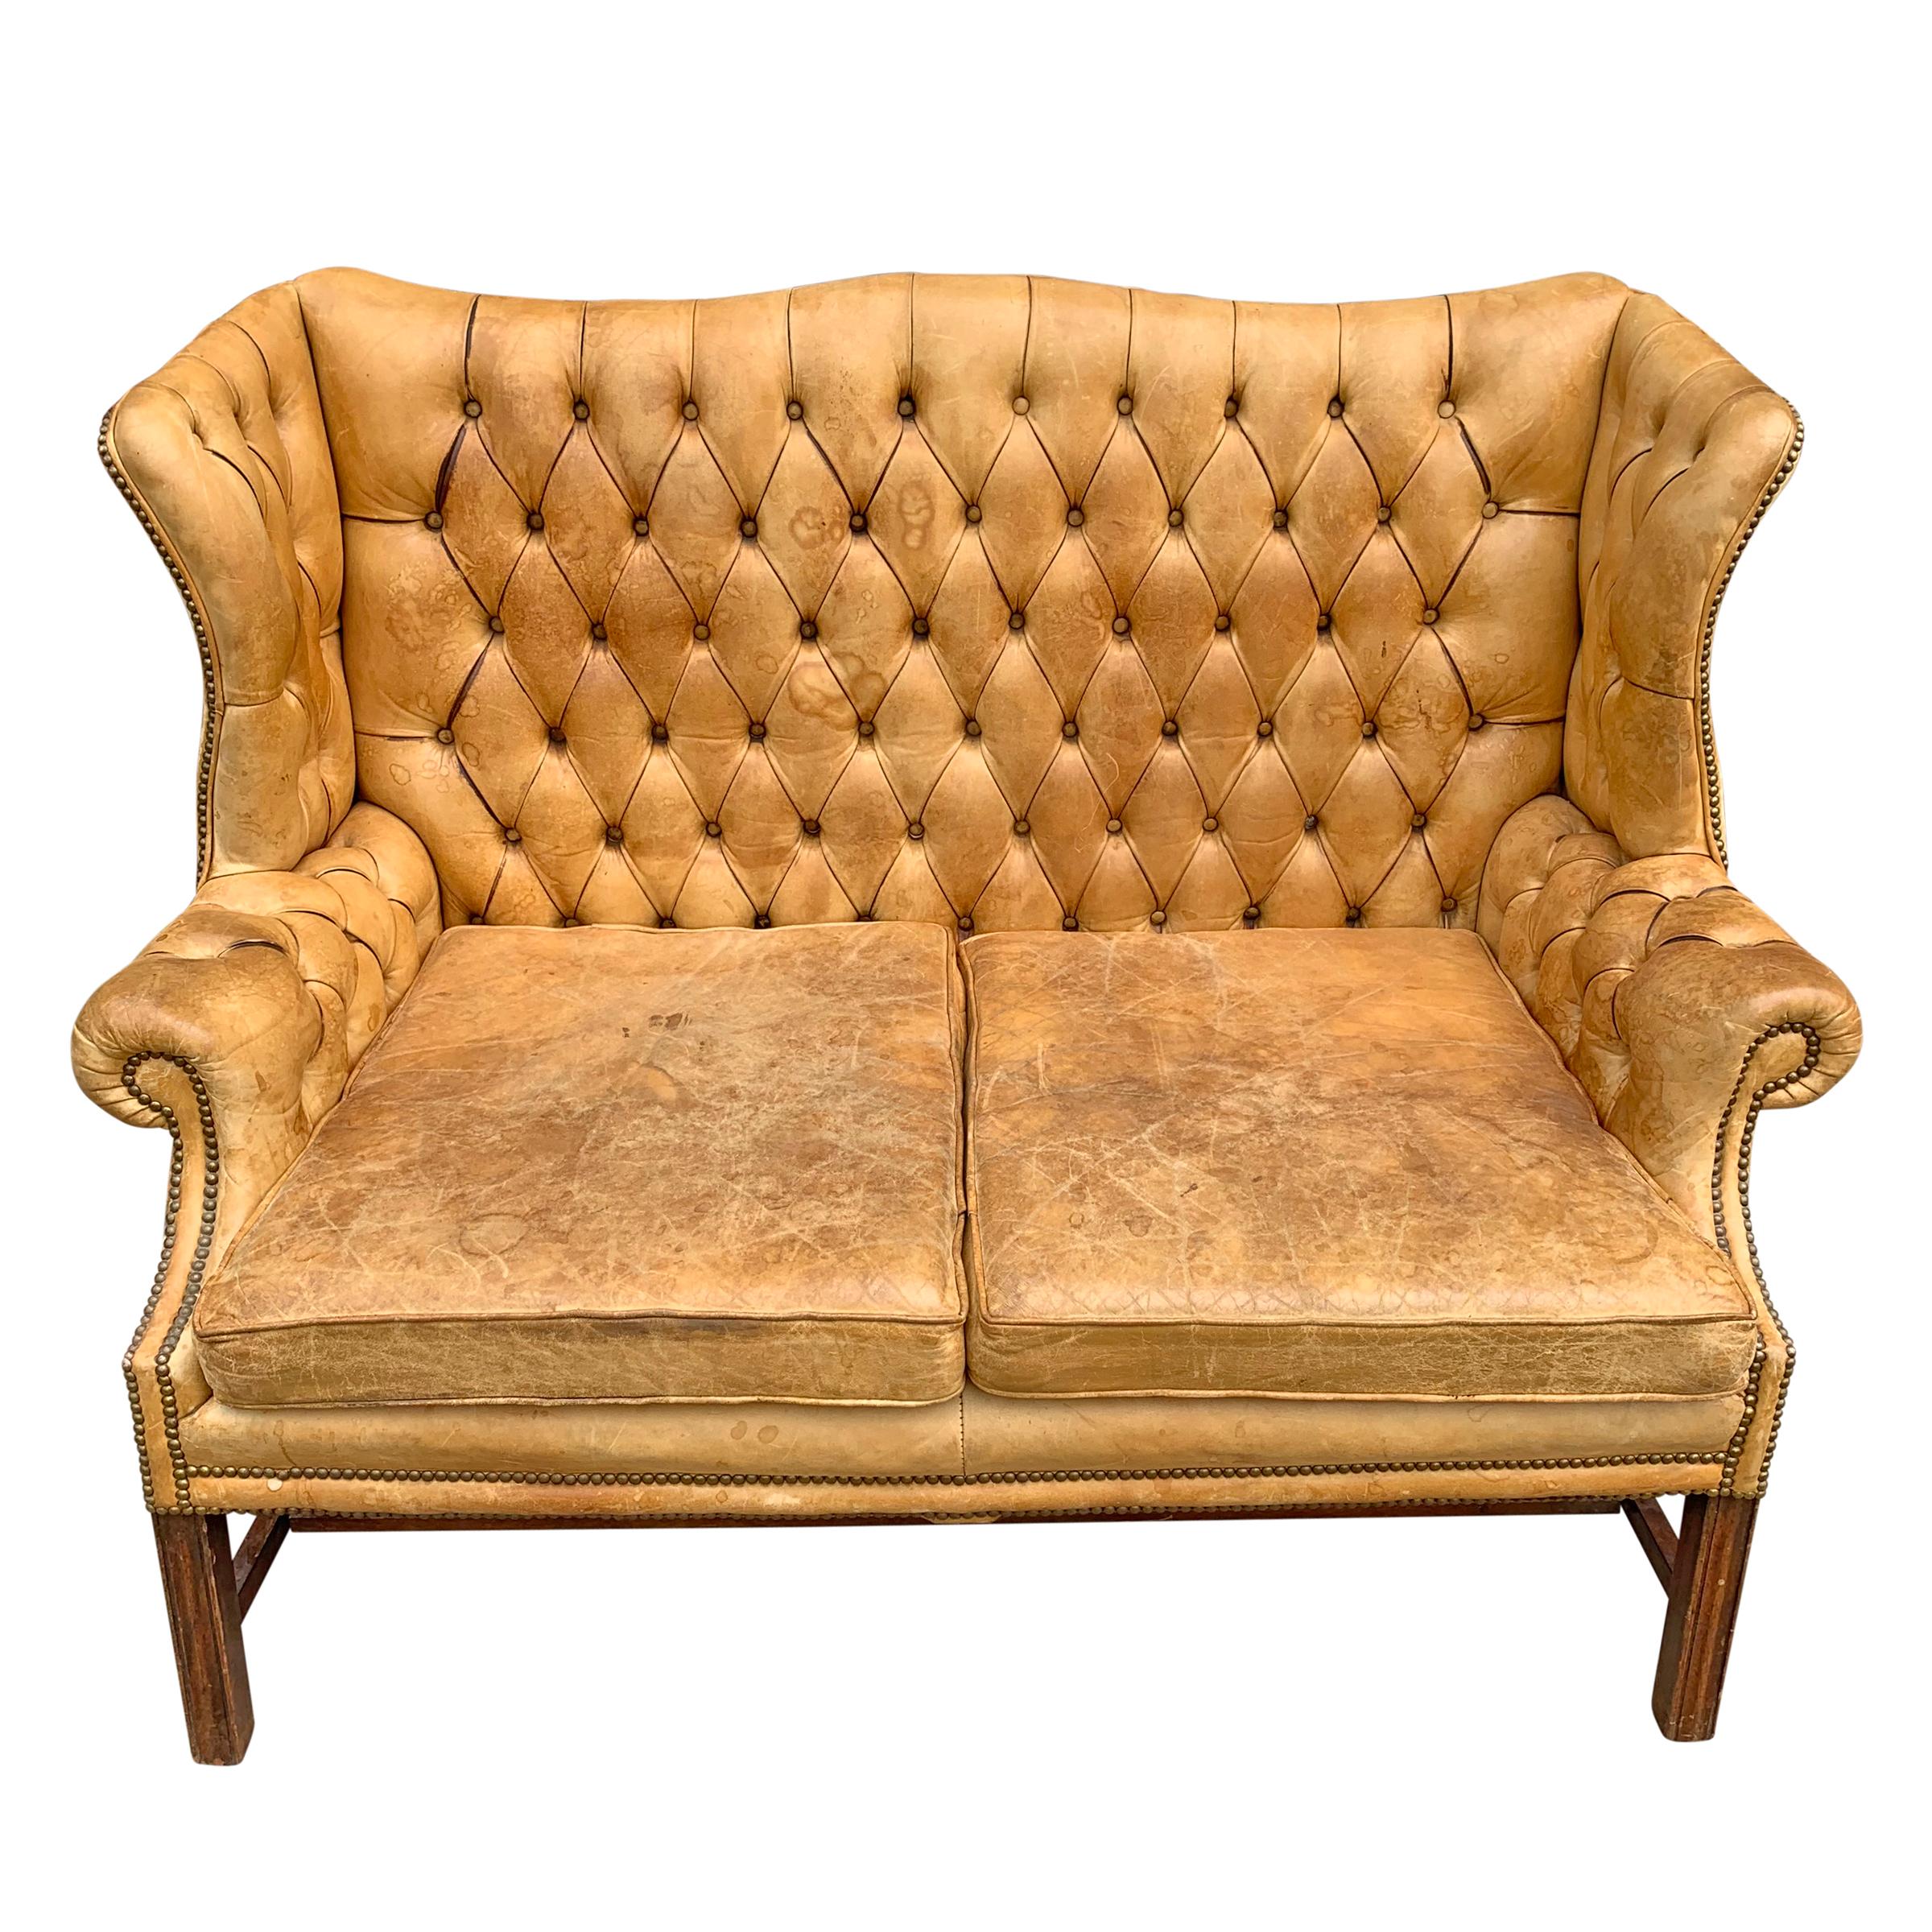 A fantastic early to mid-20th century English Chippendale-style tufted leather wingback settee with a wonderful form, super comfortable seat, and brass nailhead trim.